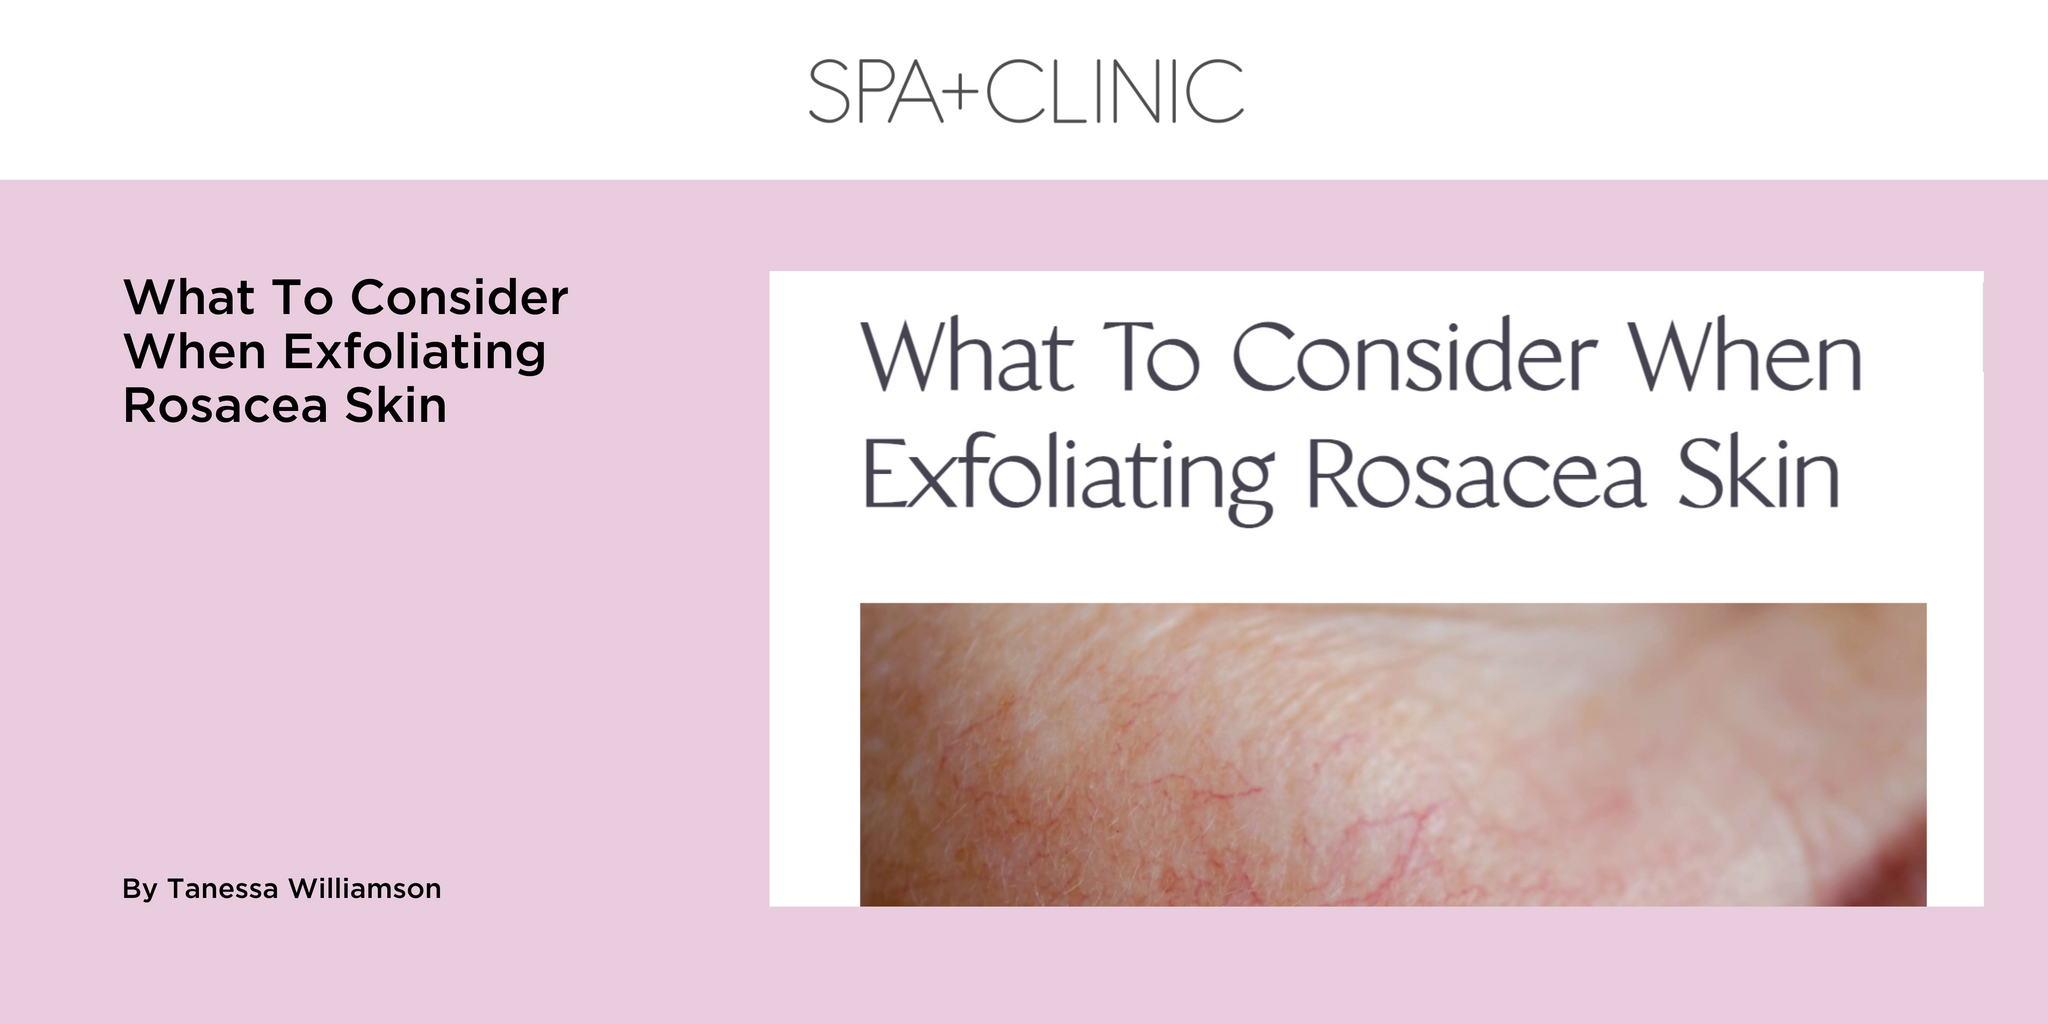 What To Consider When Exfoliating Rosacea Skin